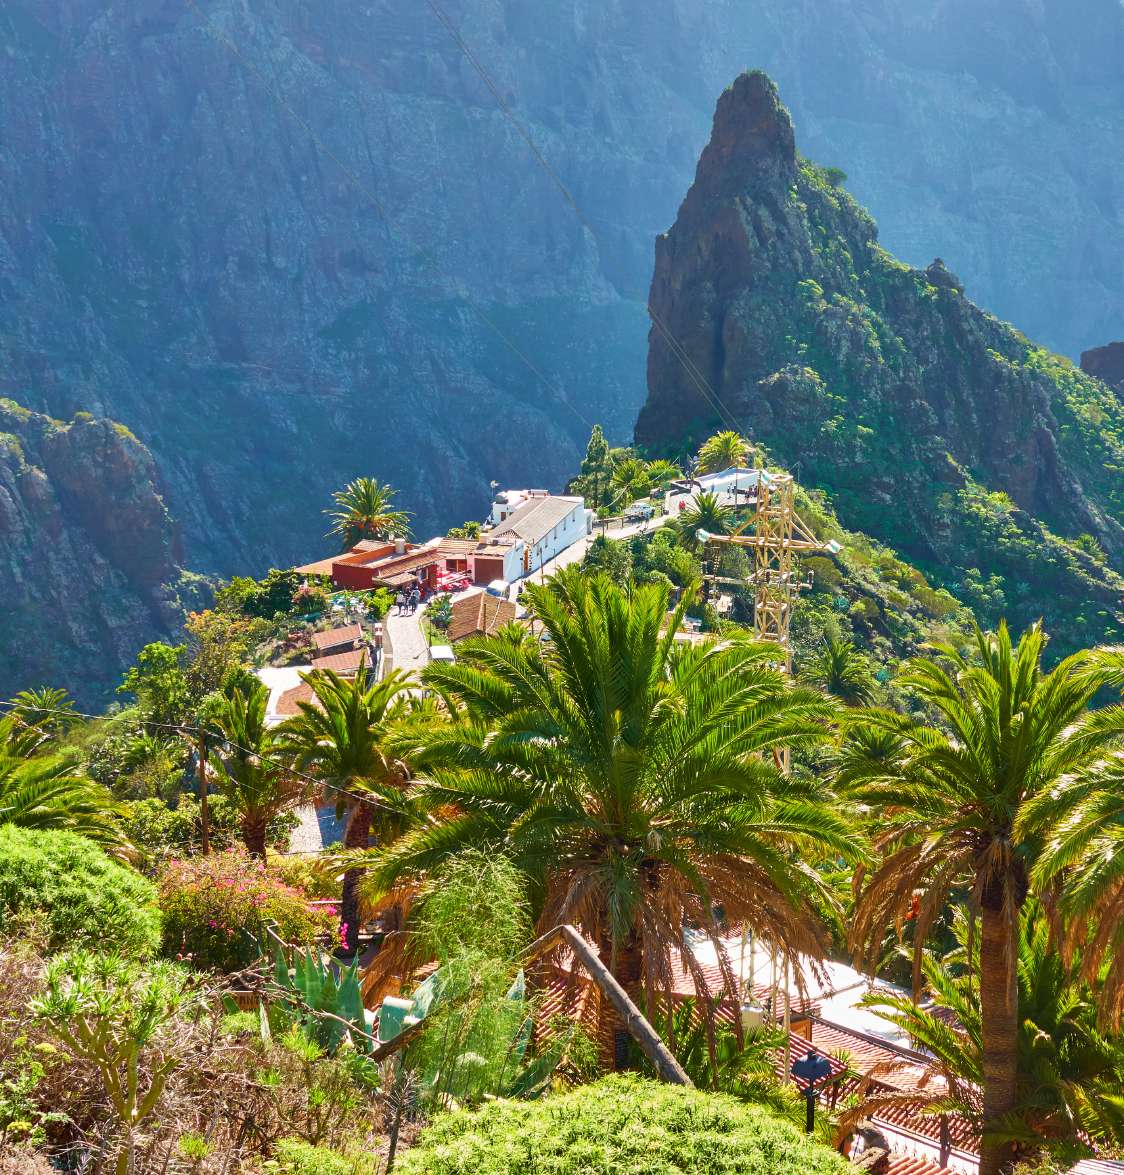 The island of Tenerife is packed with activities of all kinds!